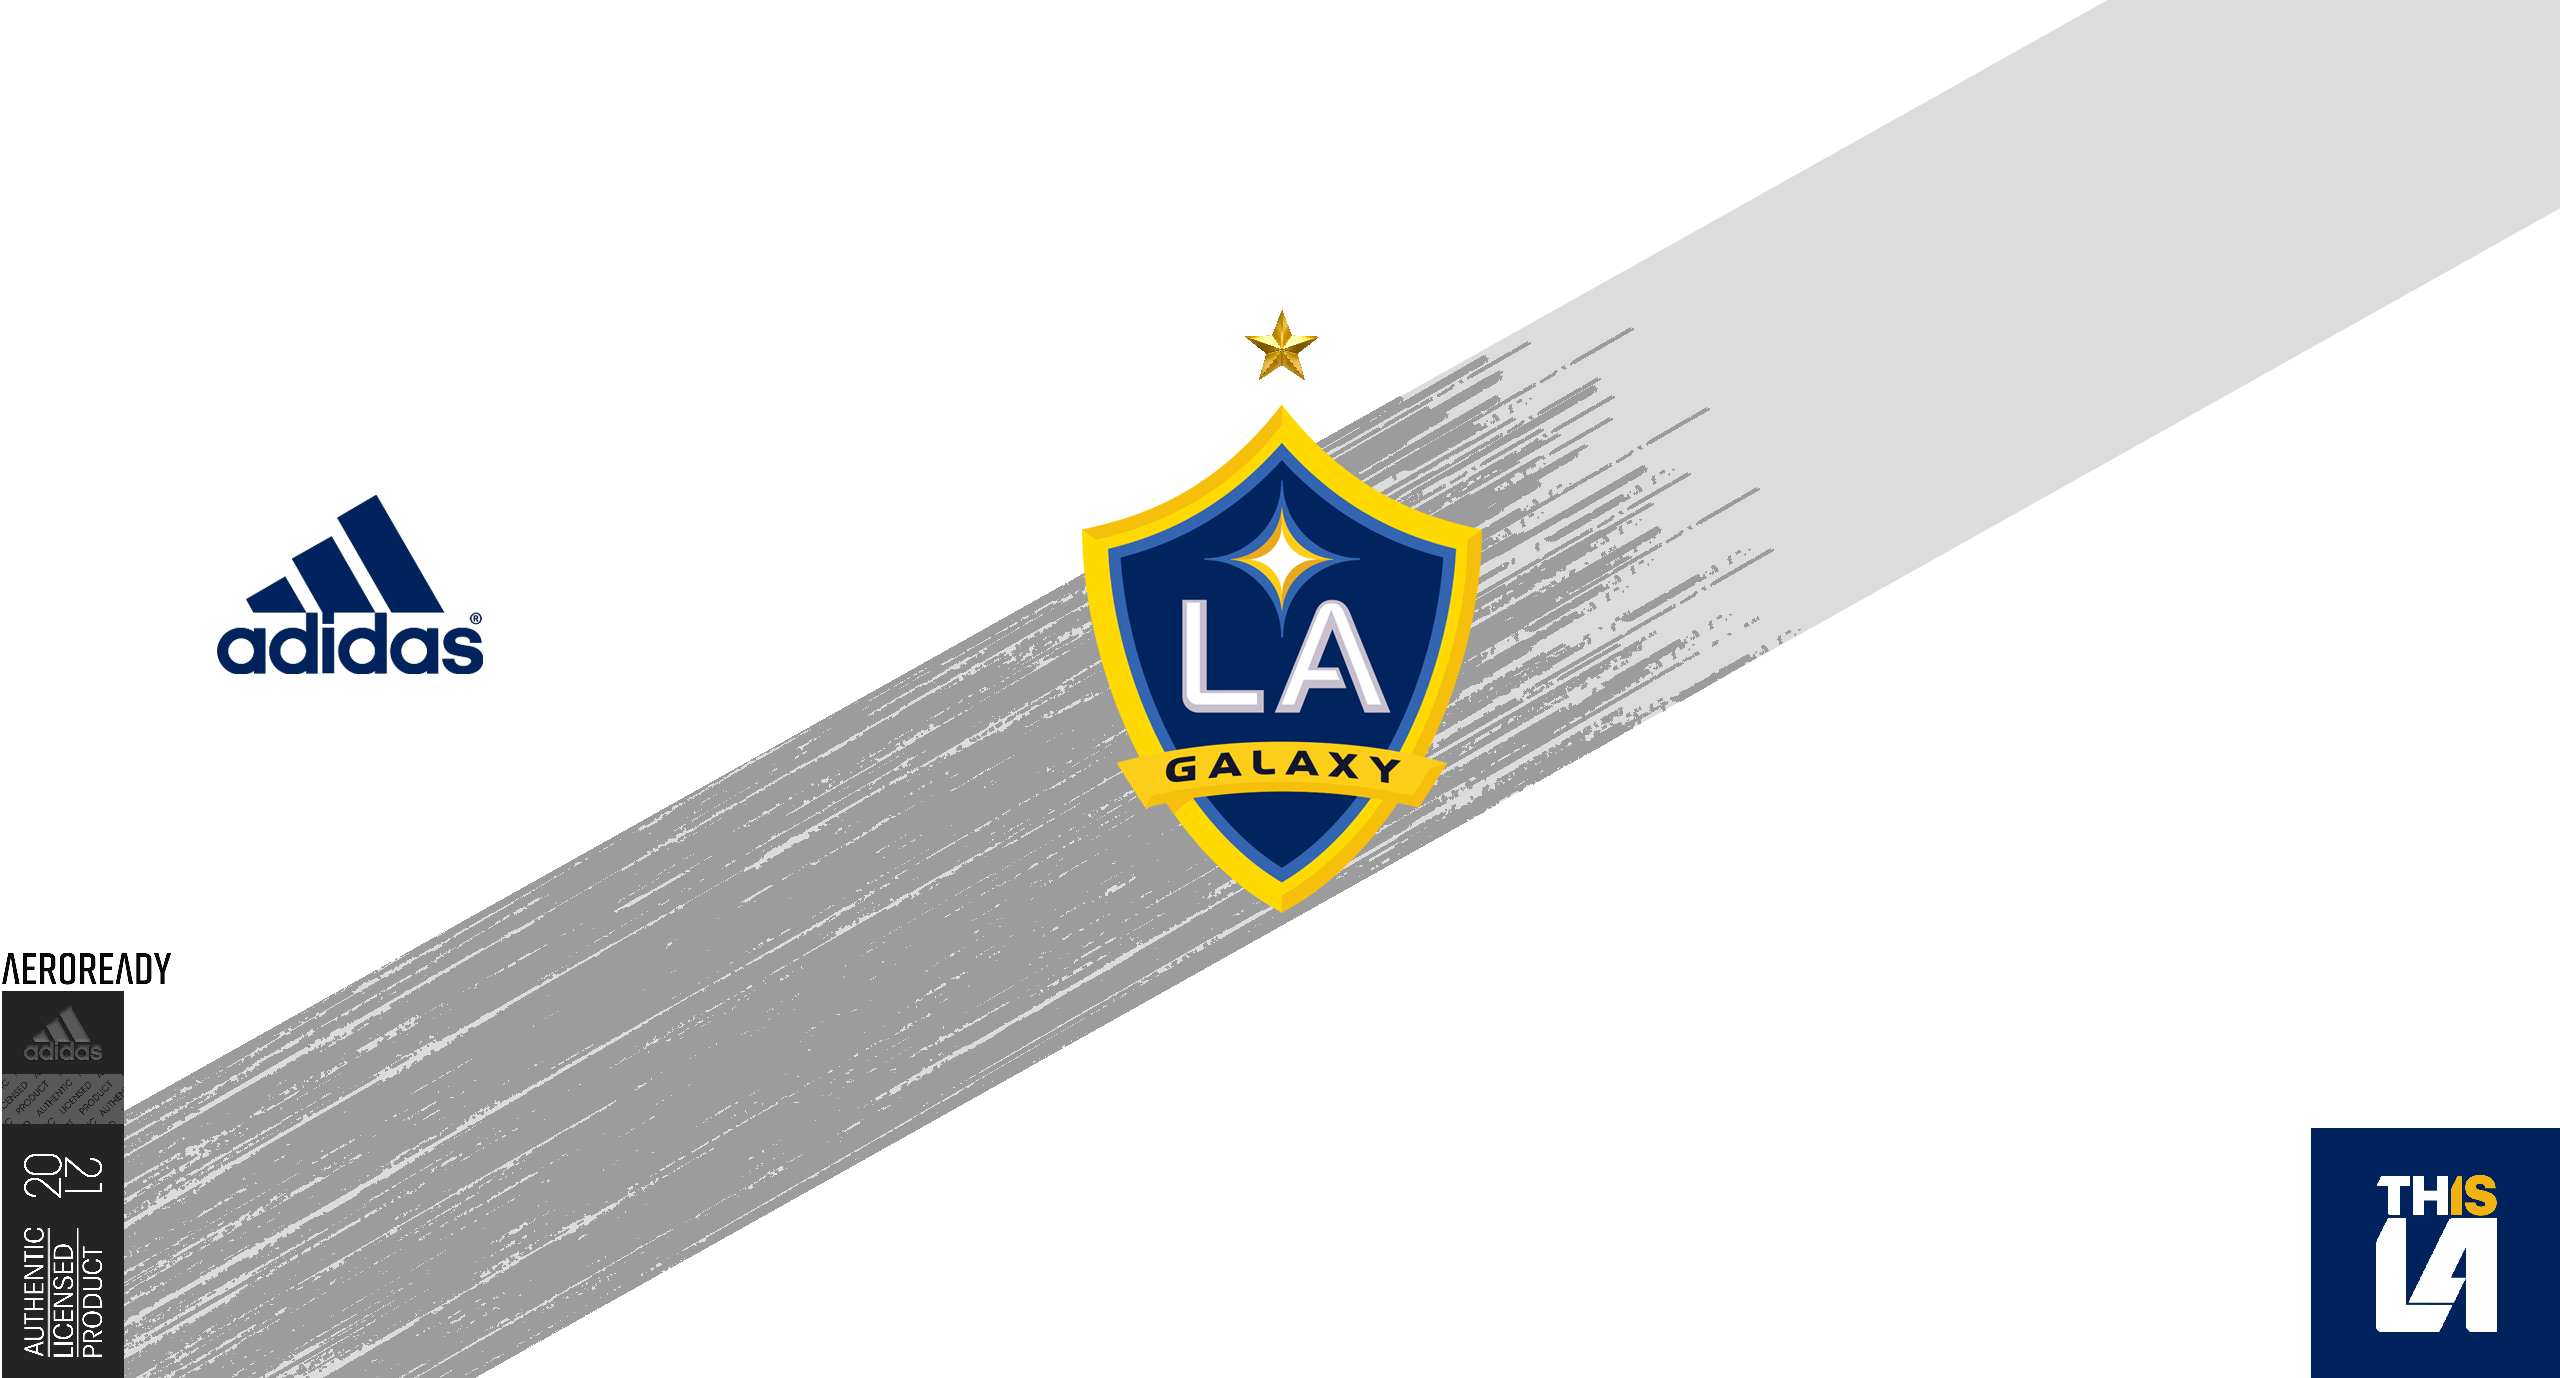 Made wallpaper based on LA Galaxy's Kits. Please Give me feedback on how these came out